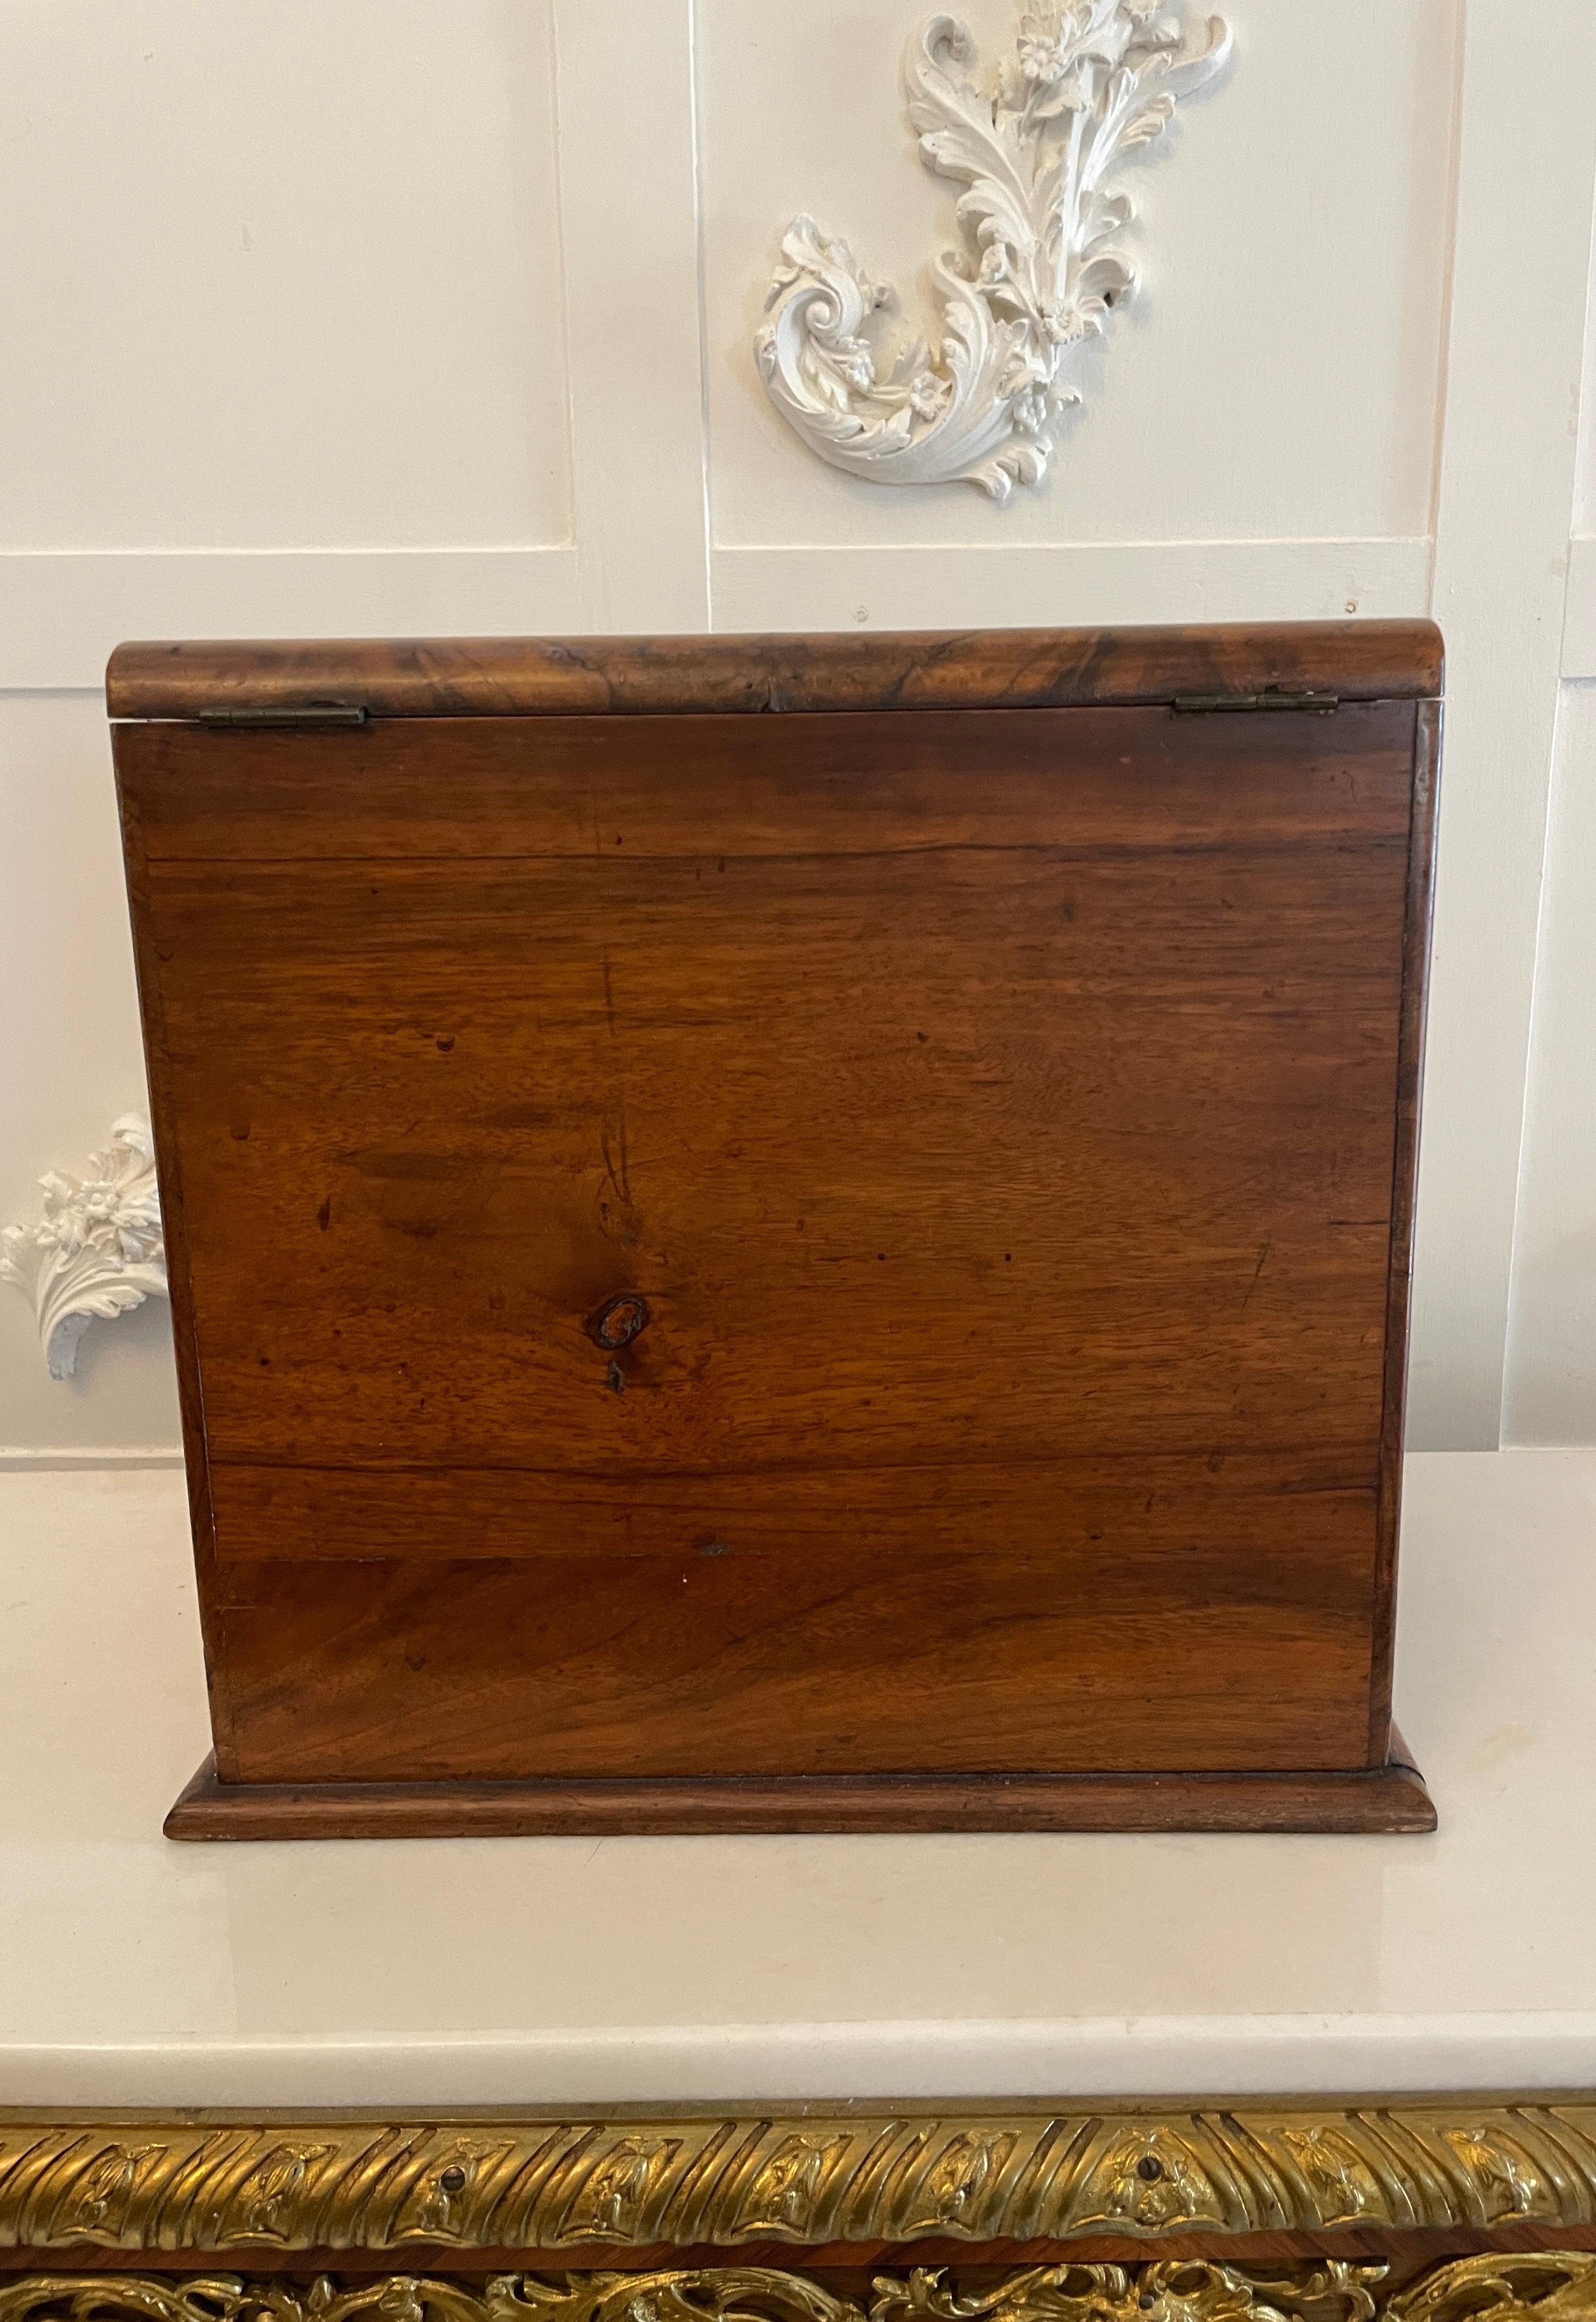 Antique Victorian burr walnut stationery box having two impressive burr walnut doors opening to reveal the most devine fully fitted interior comprising of an adjustable day, date and month calendar, shaped letter rack, pen tray, sliding notepad, one